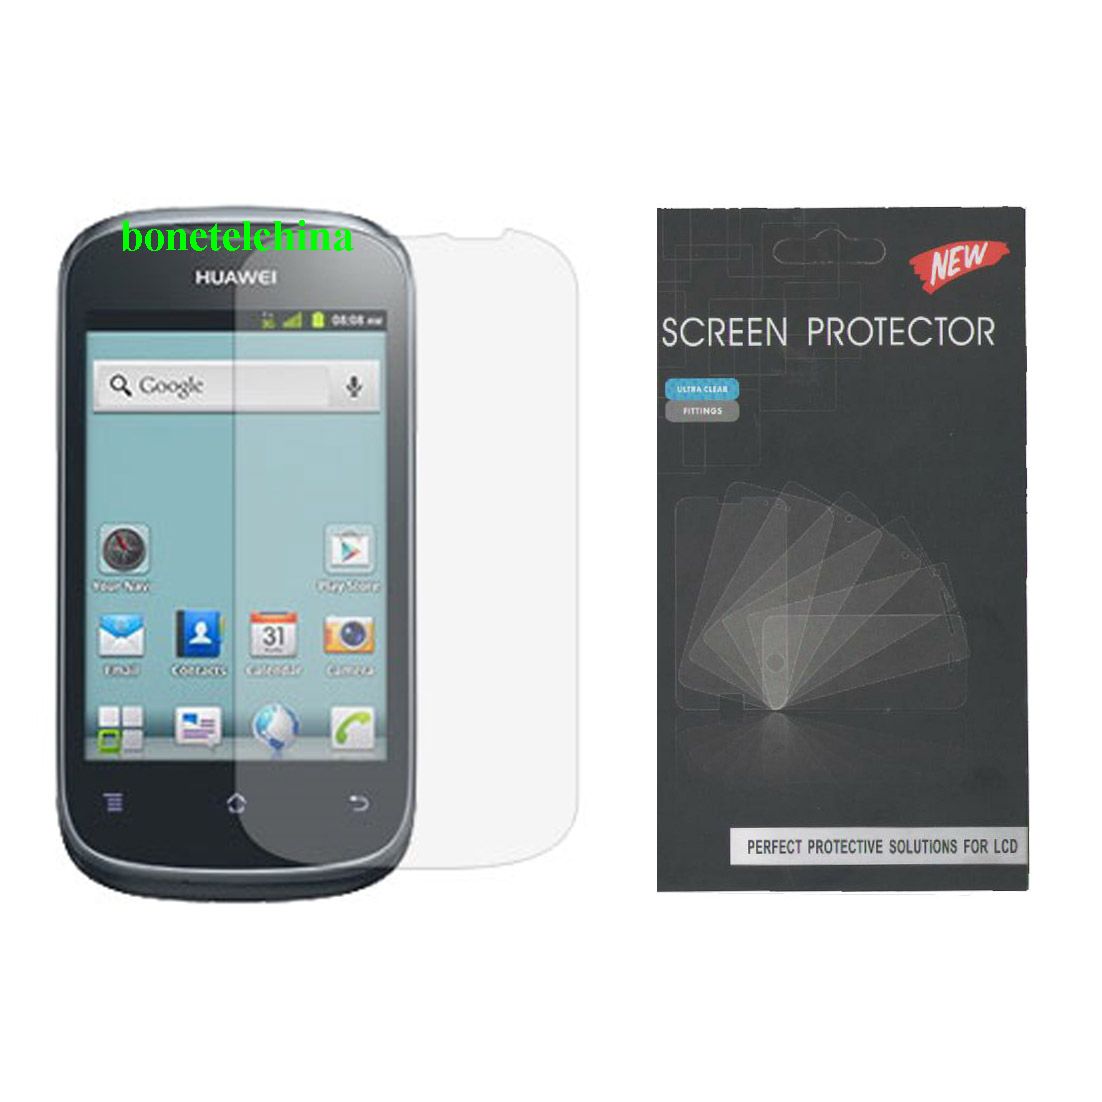 Screen Protector for Huawei M866